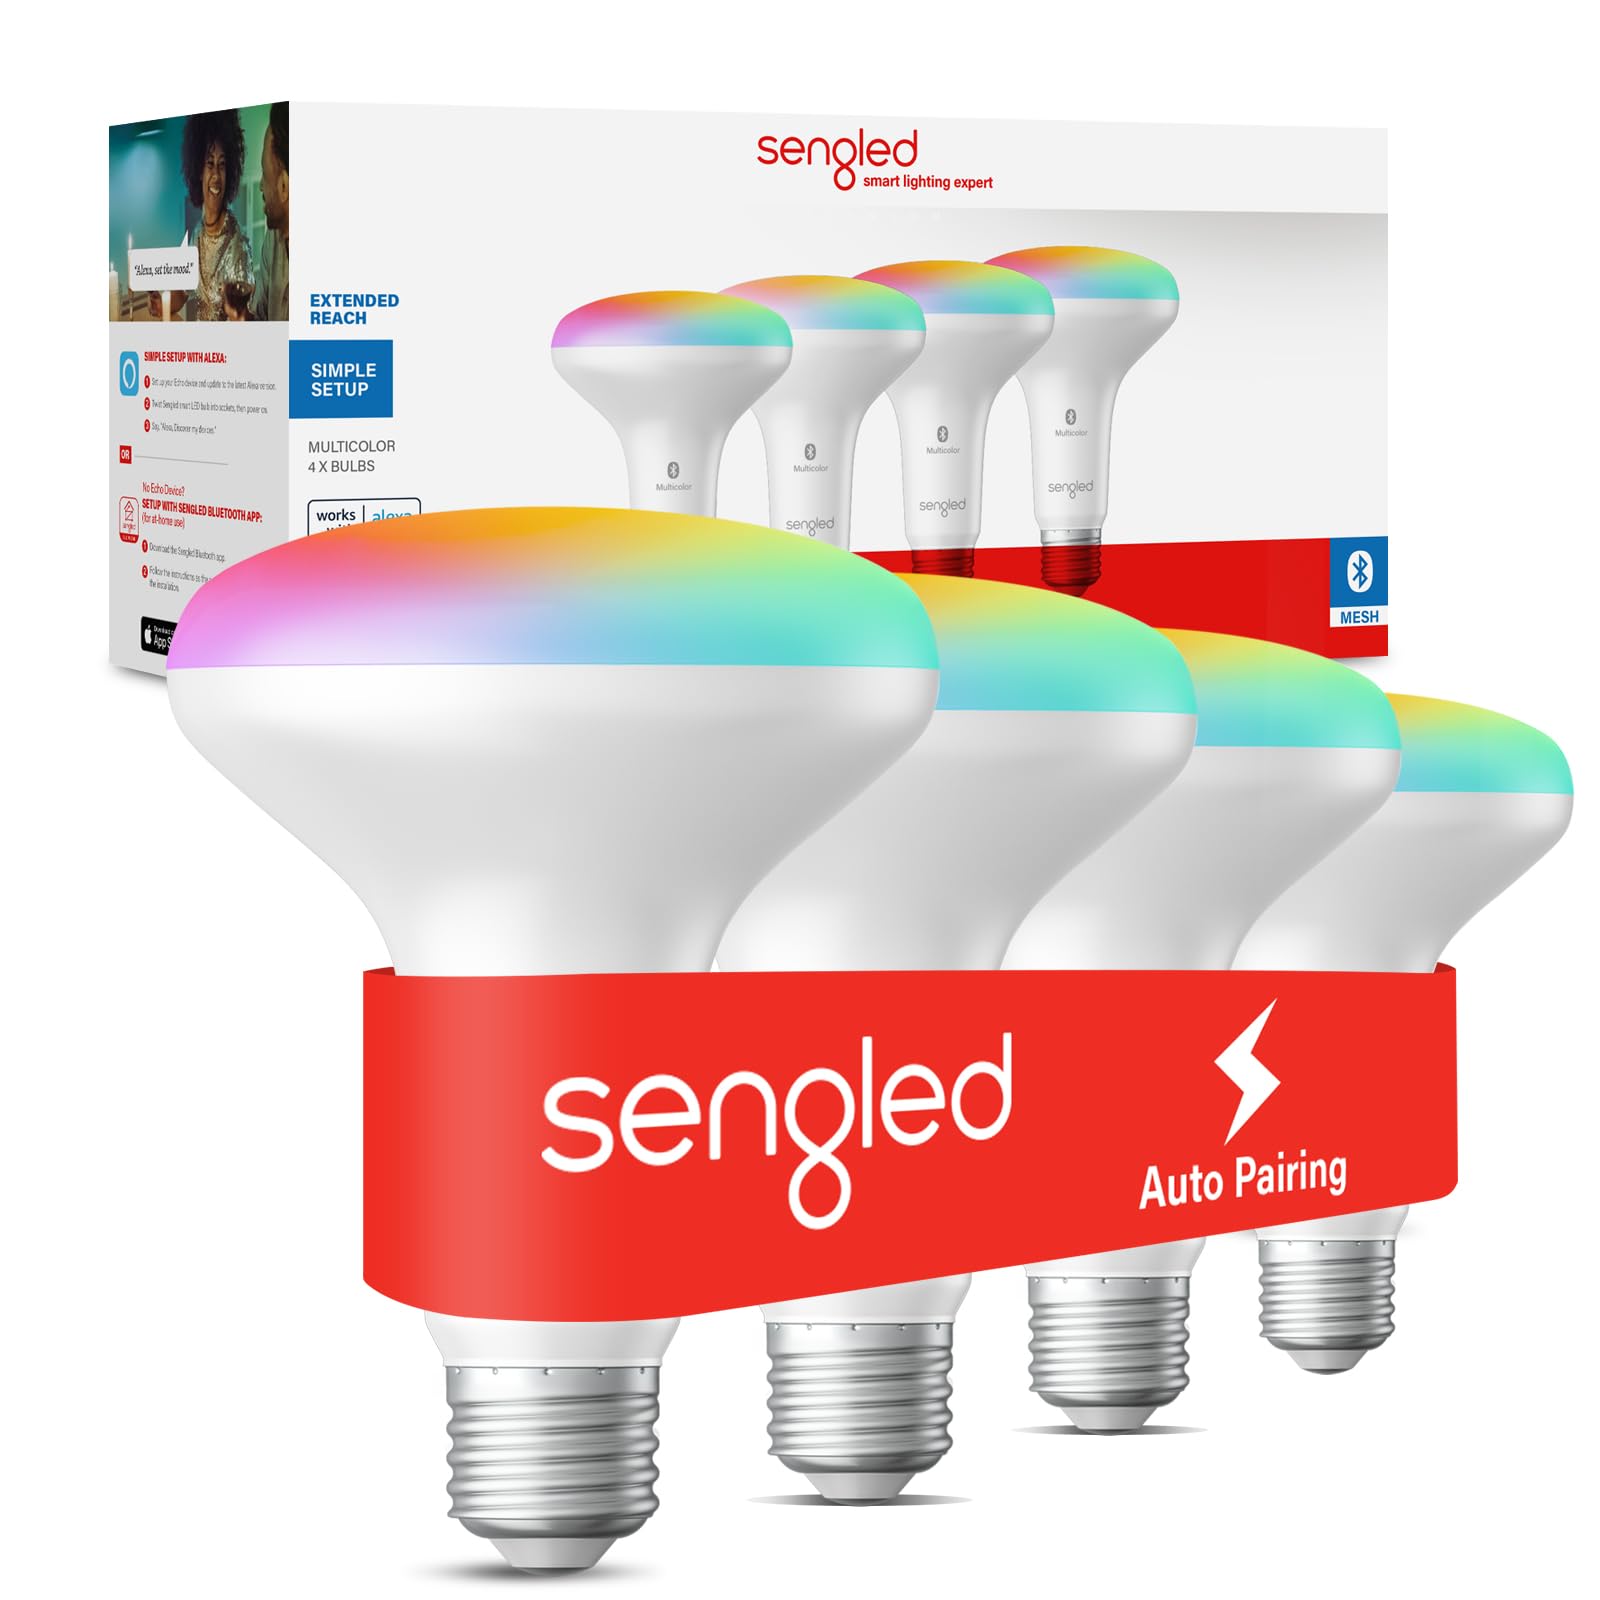 How to Put Sengled Bulb in Pairing Mode